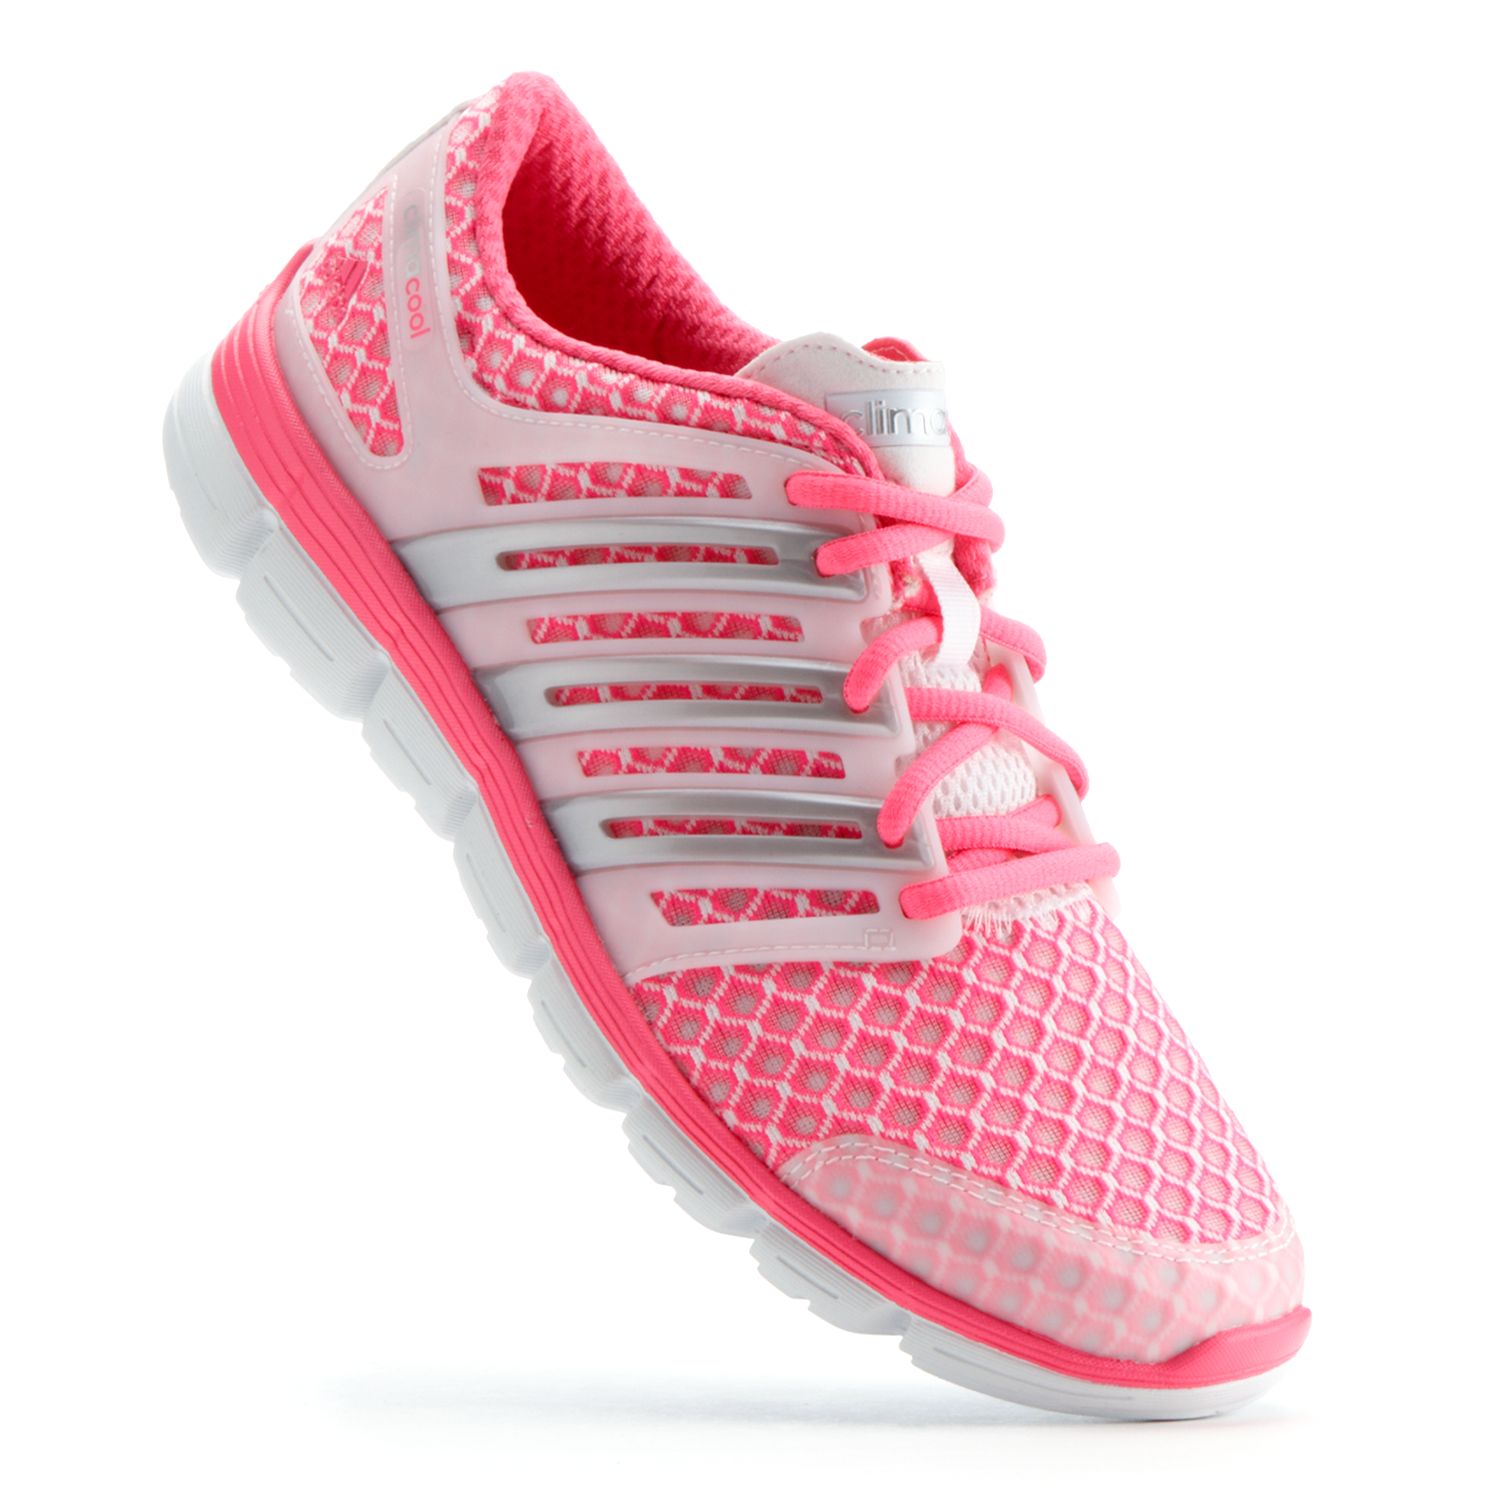 adidas climacool crazy running shoes review